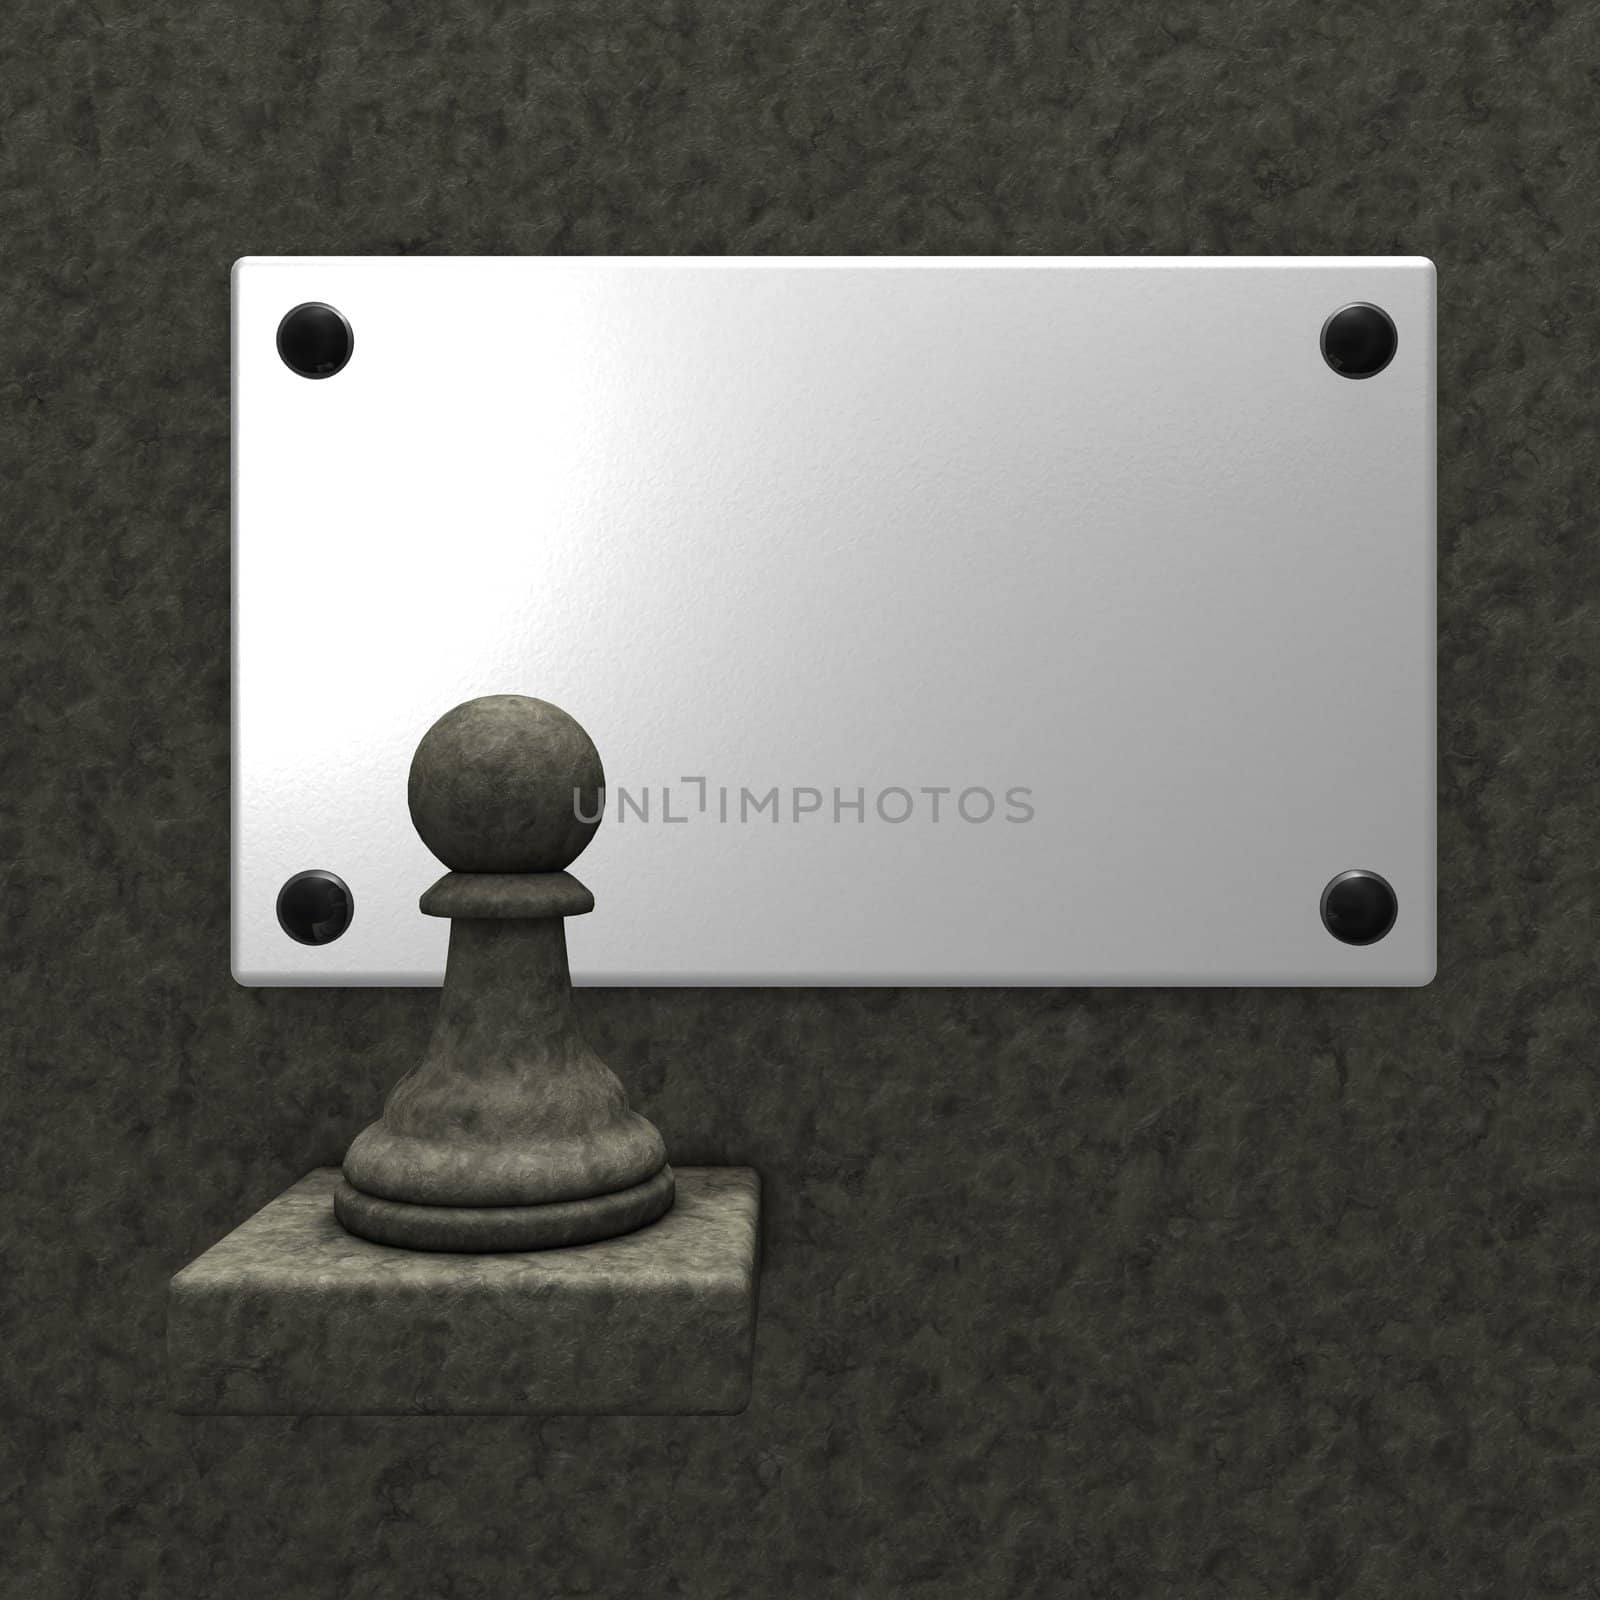 stone chess pawn and blank white sign - 3d illustration